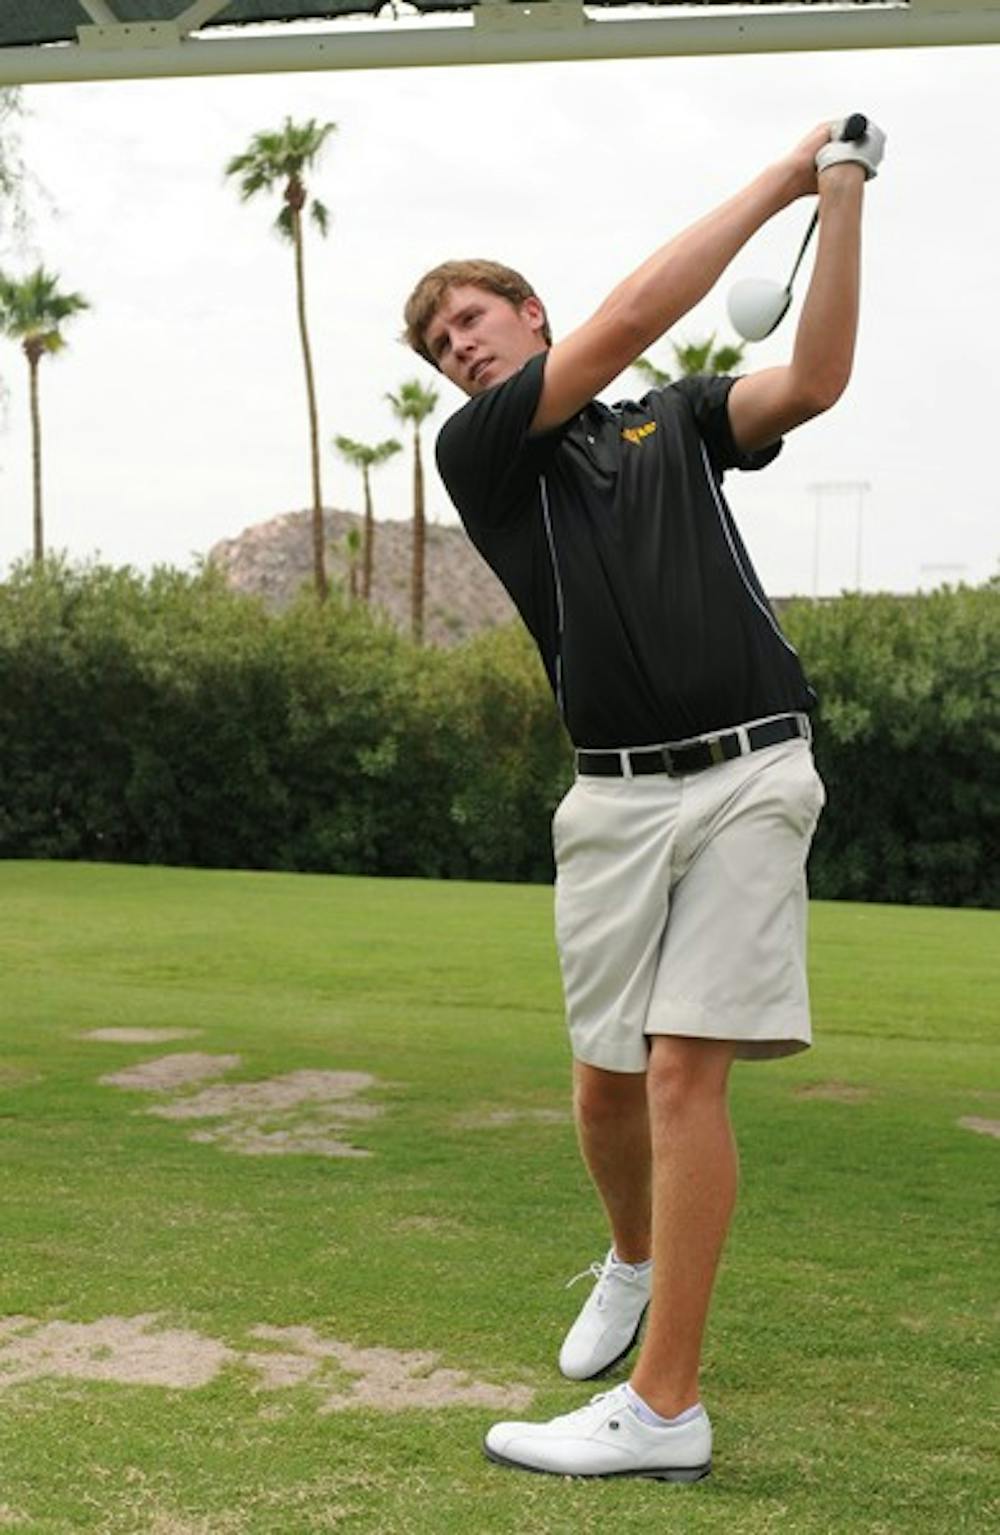 GETTING IT DONE: Senior Spencer Fletcher practices his wing during Media Day earlier this season. The ASU men’s golf team won the Cullum Invitational on Tuesday, with Fletcher tying for first. (Photo courtesy of Maggie Emmons)